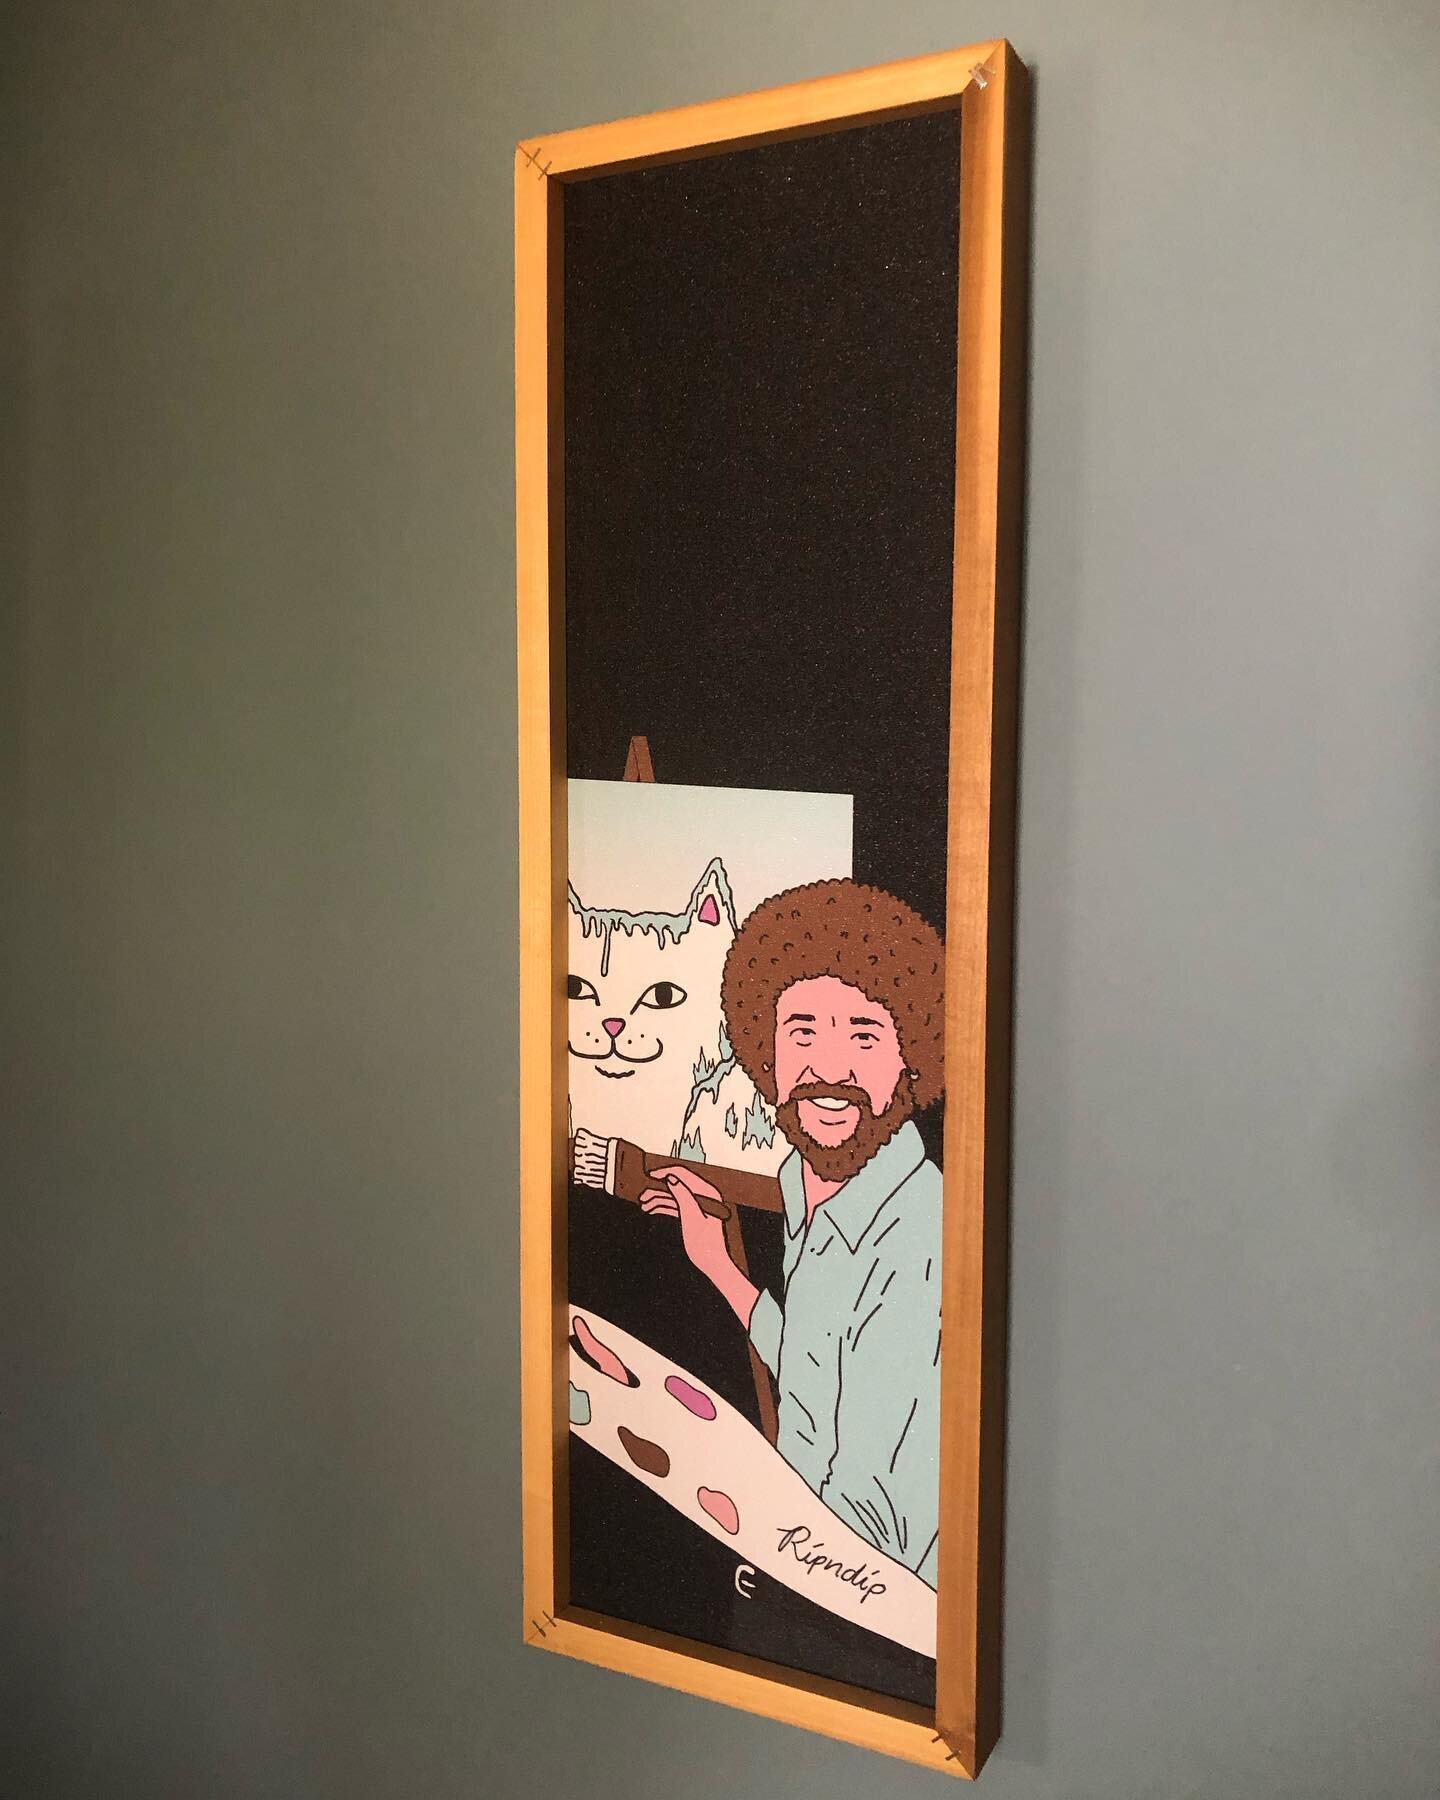 We artists are a different breed of people. We&rsquo;re a happy bunch. -Bob Ross  #frameityourway #ripndip #skateboardgriptapeart